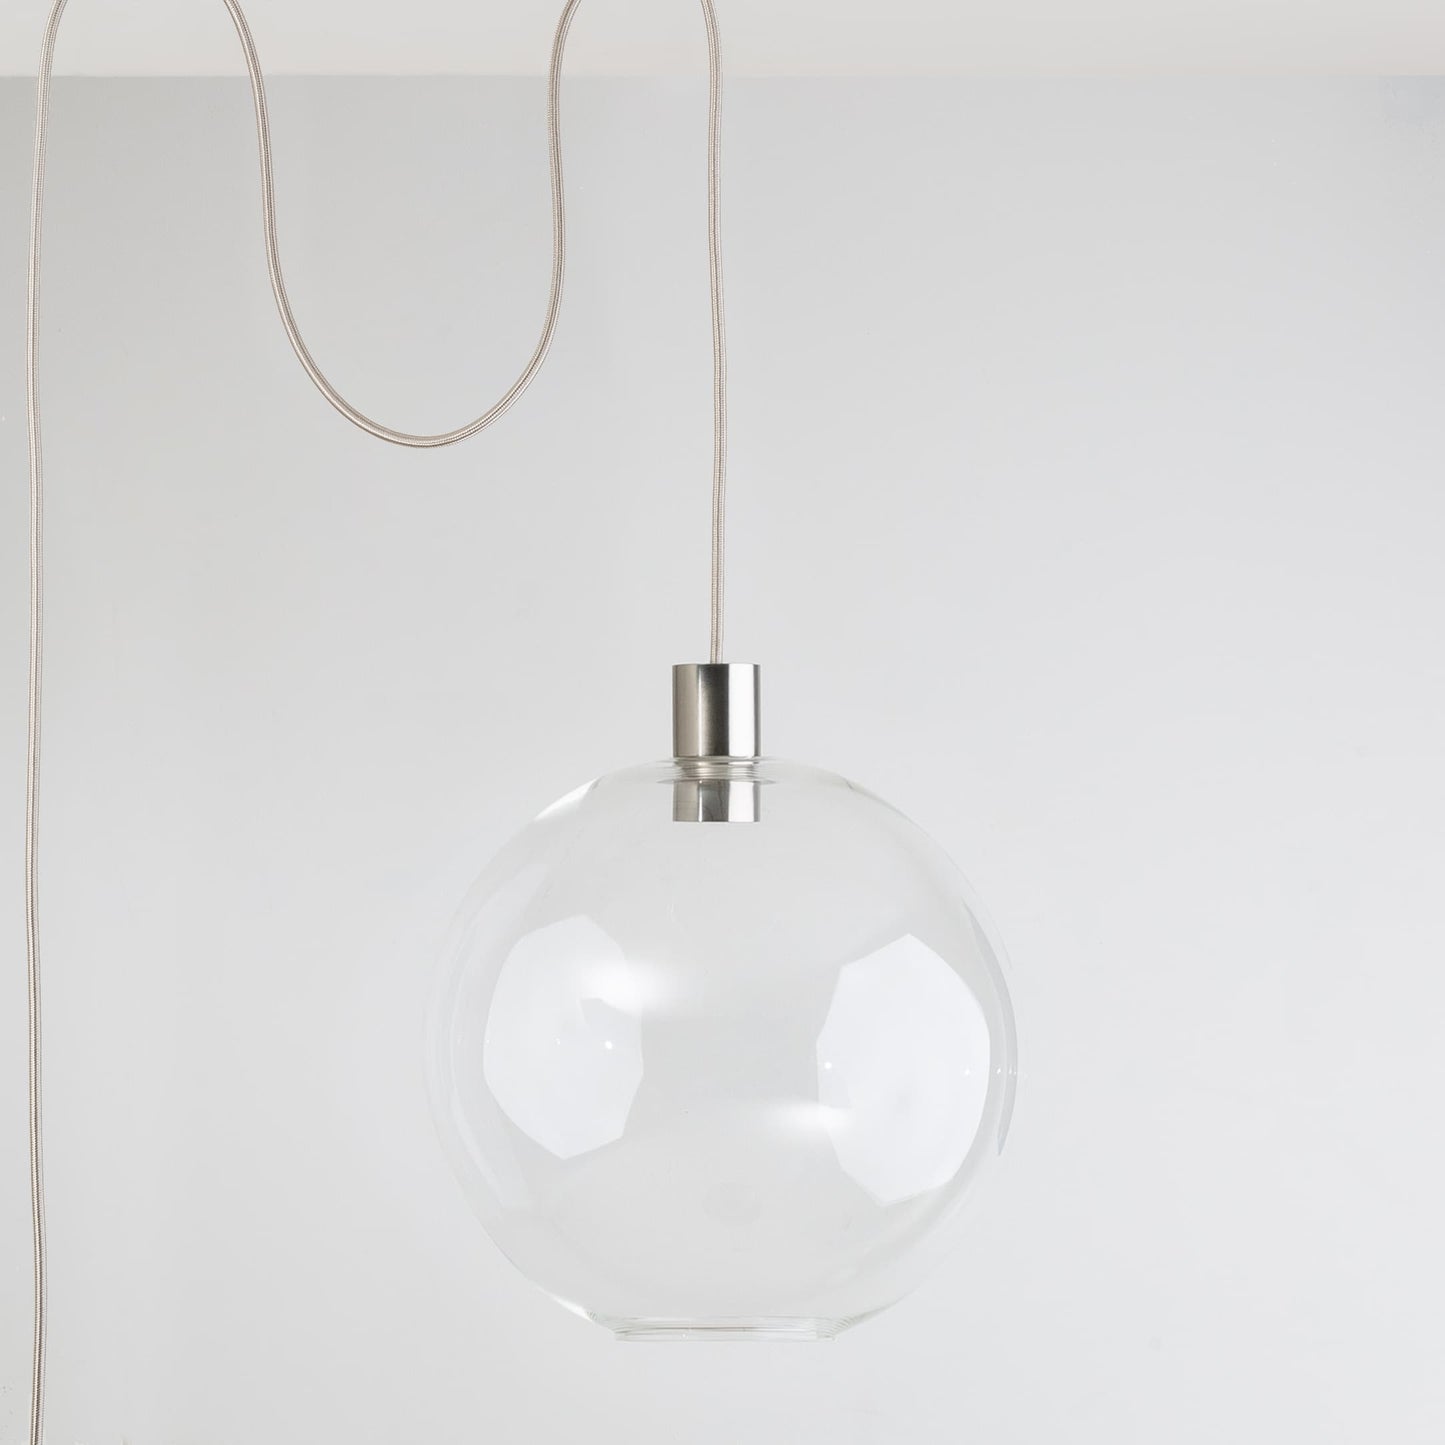 12” All-in-One (AiO) Globe Ceiling Plug-In Pendant